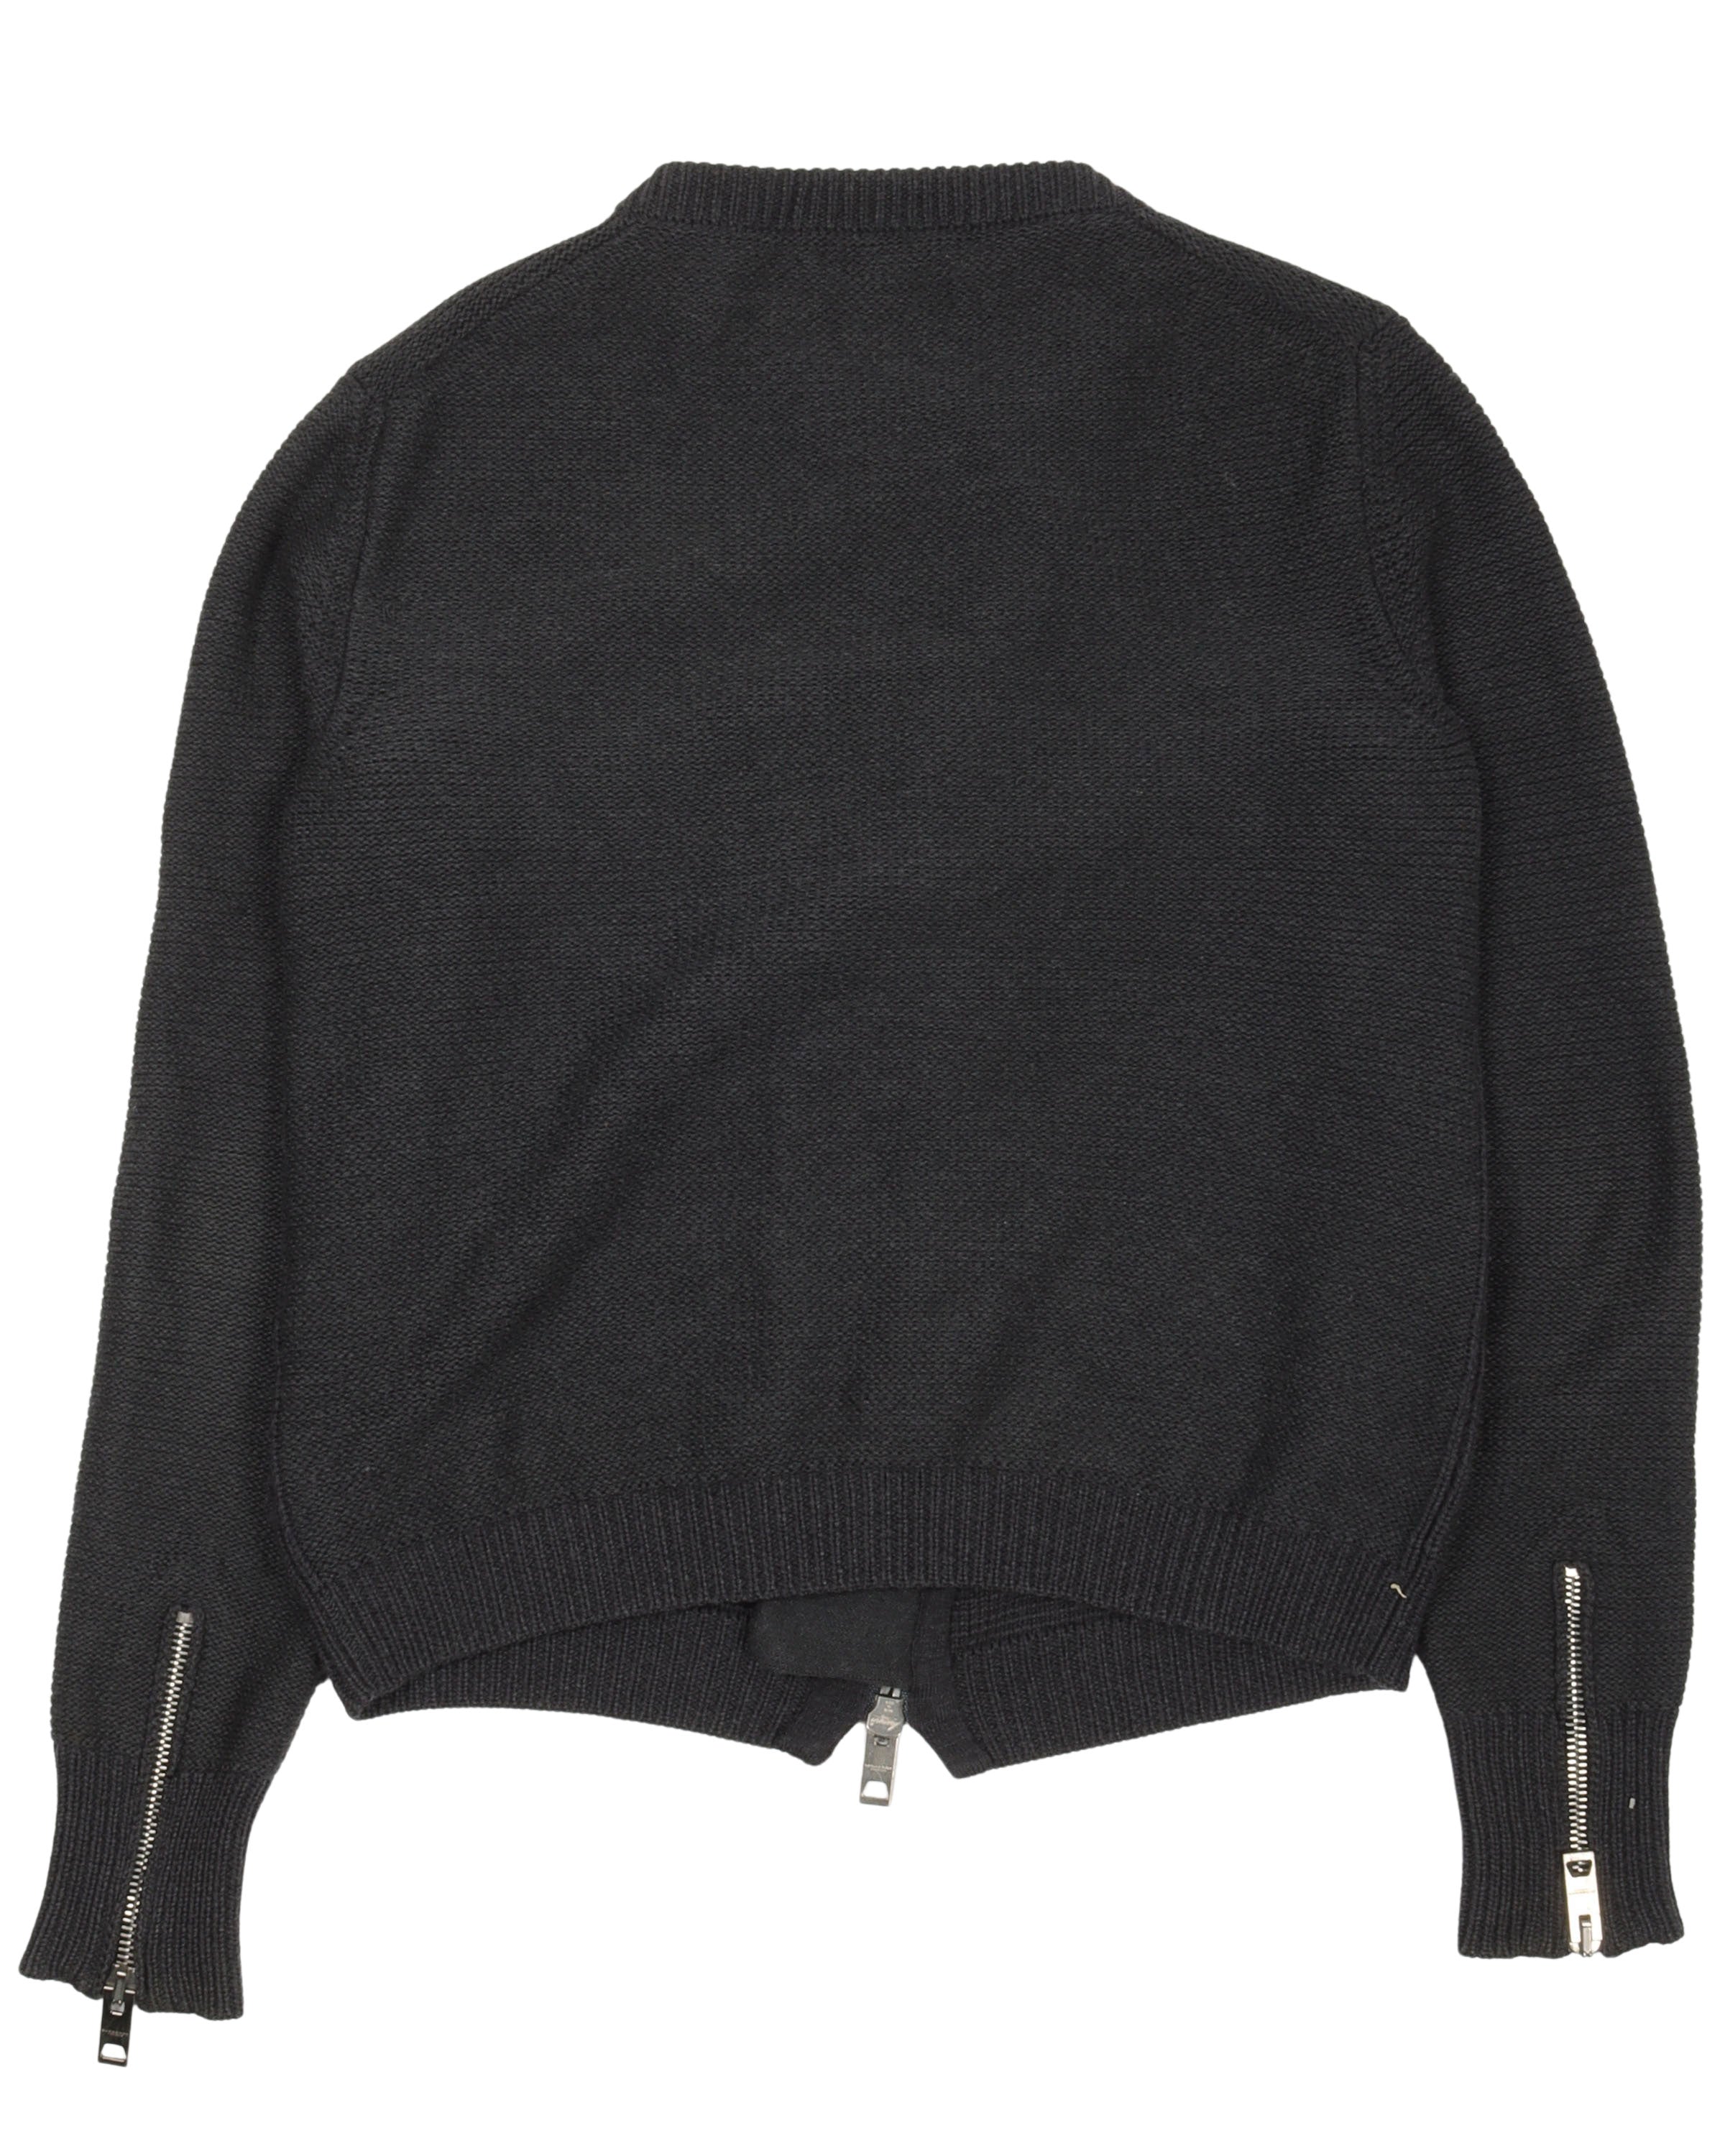 Zip Up Knit Sweater